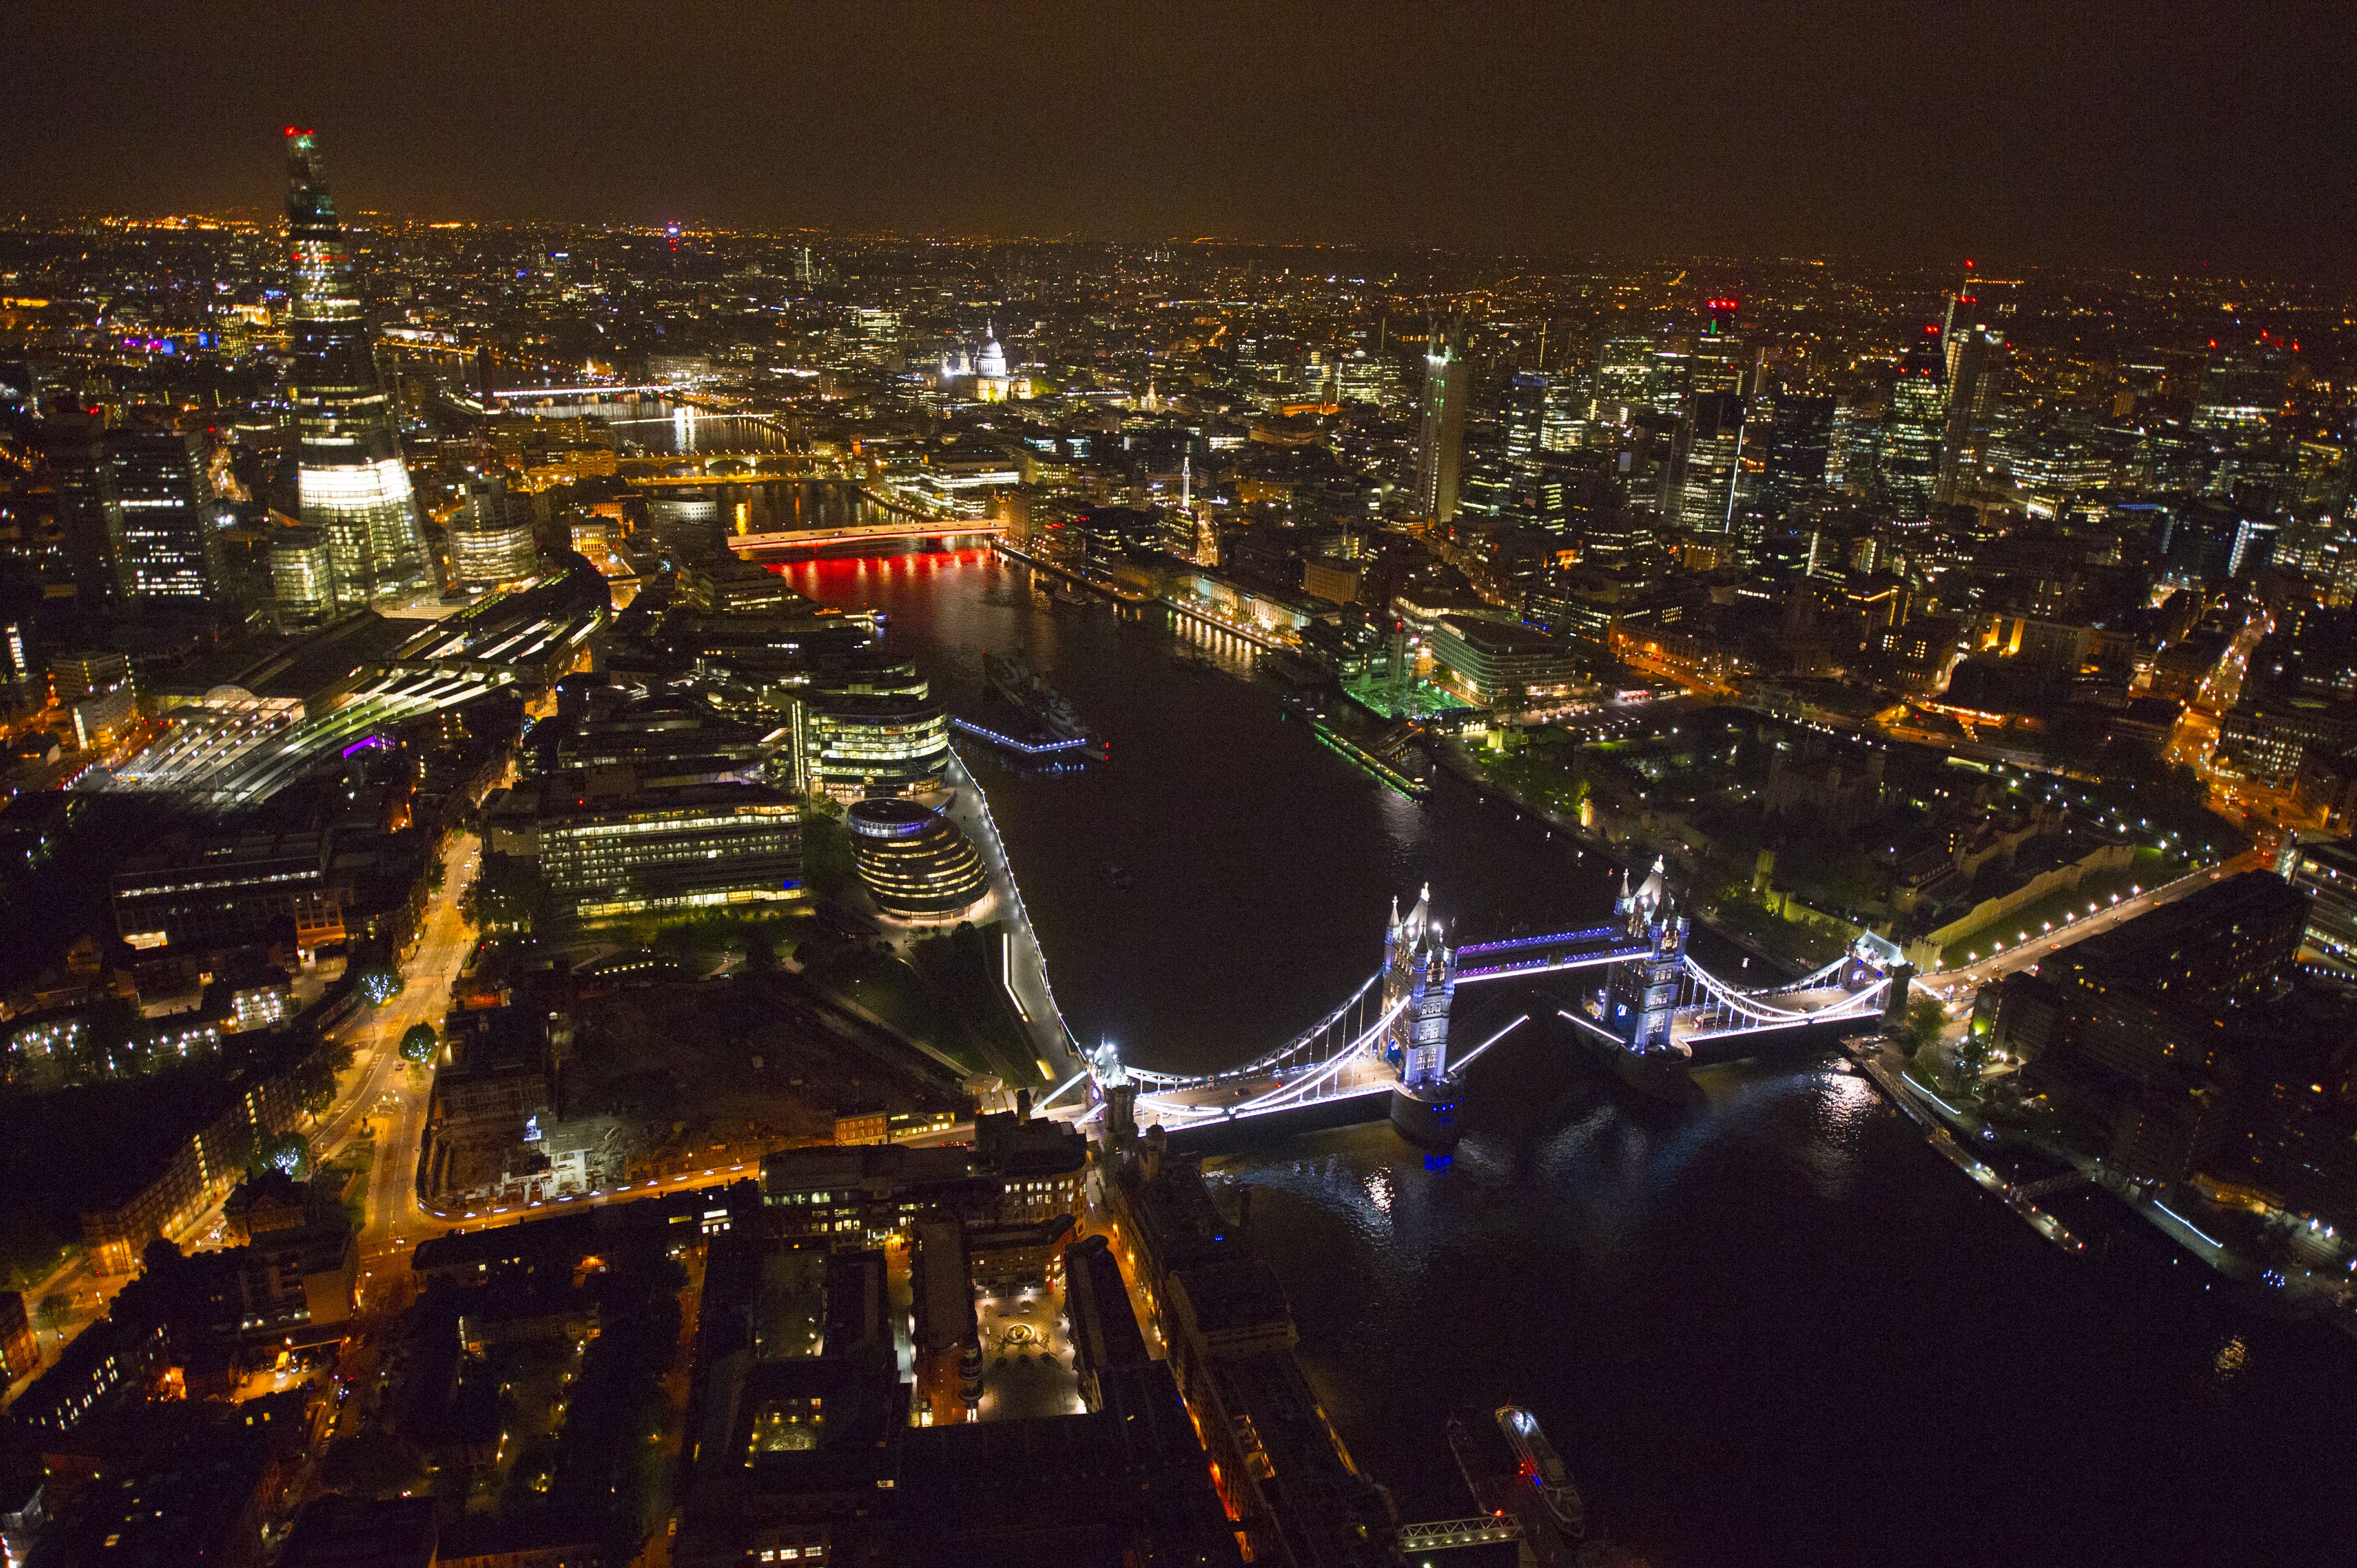 Photo: A Lovely Aerial Photo of London Taken At Night For Your Desktop Wallpaper